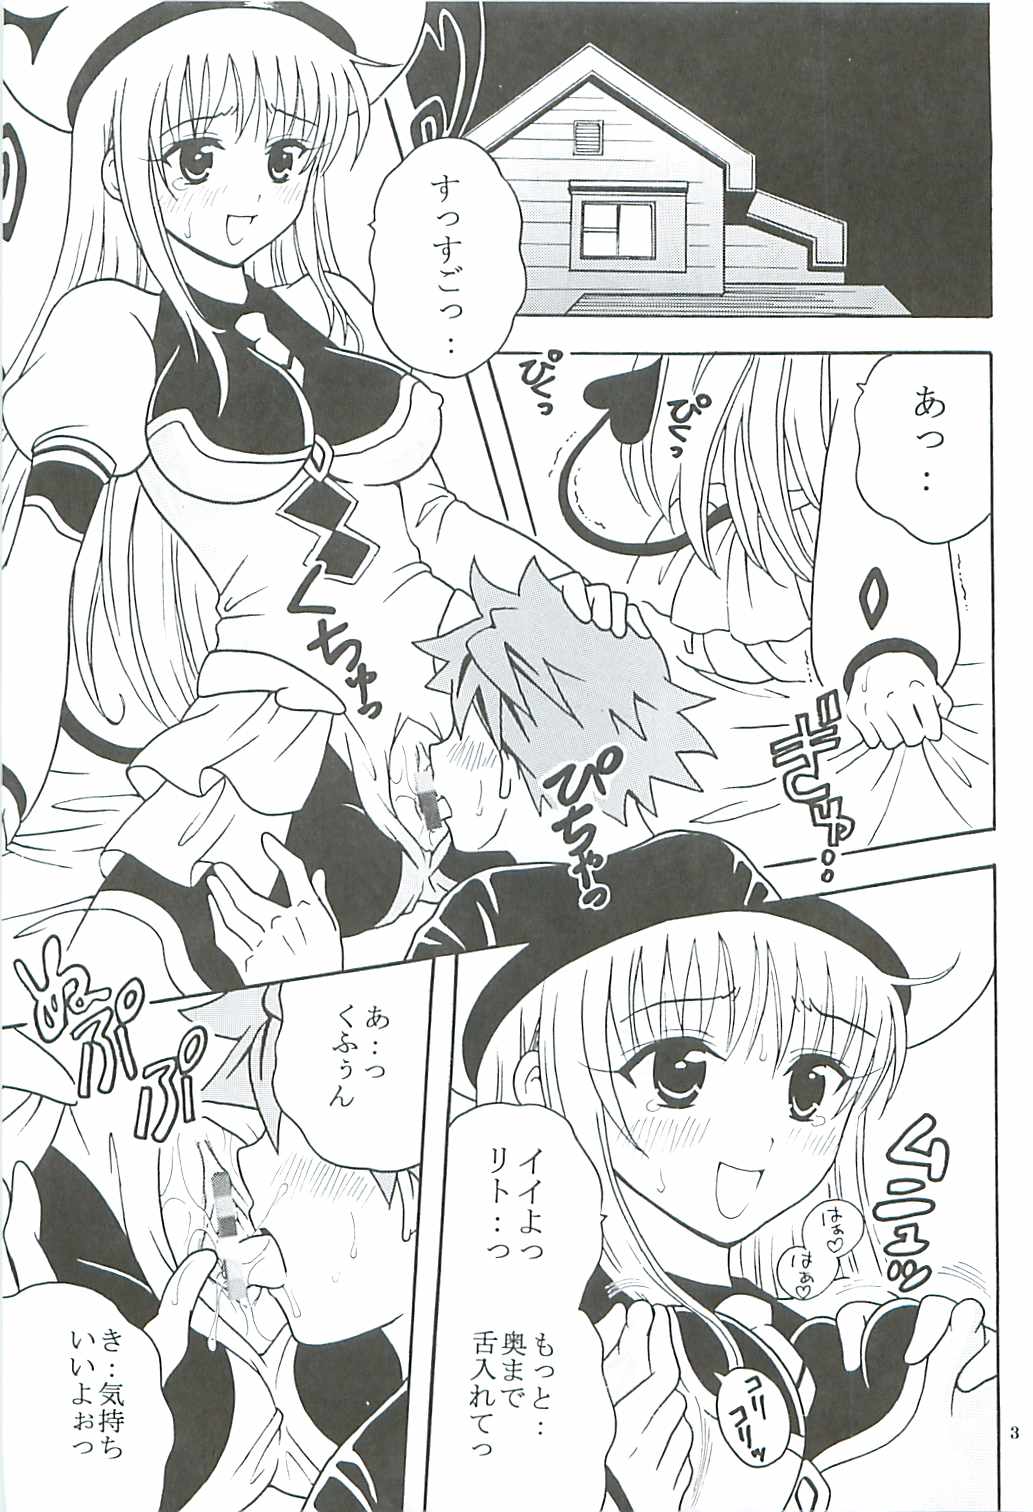 [St.Rio] ToLOVE Ryu 2 (To Love Ru) page 4 full